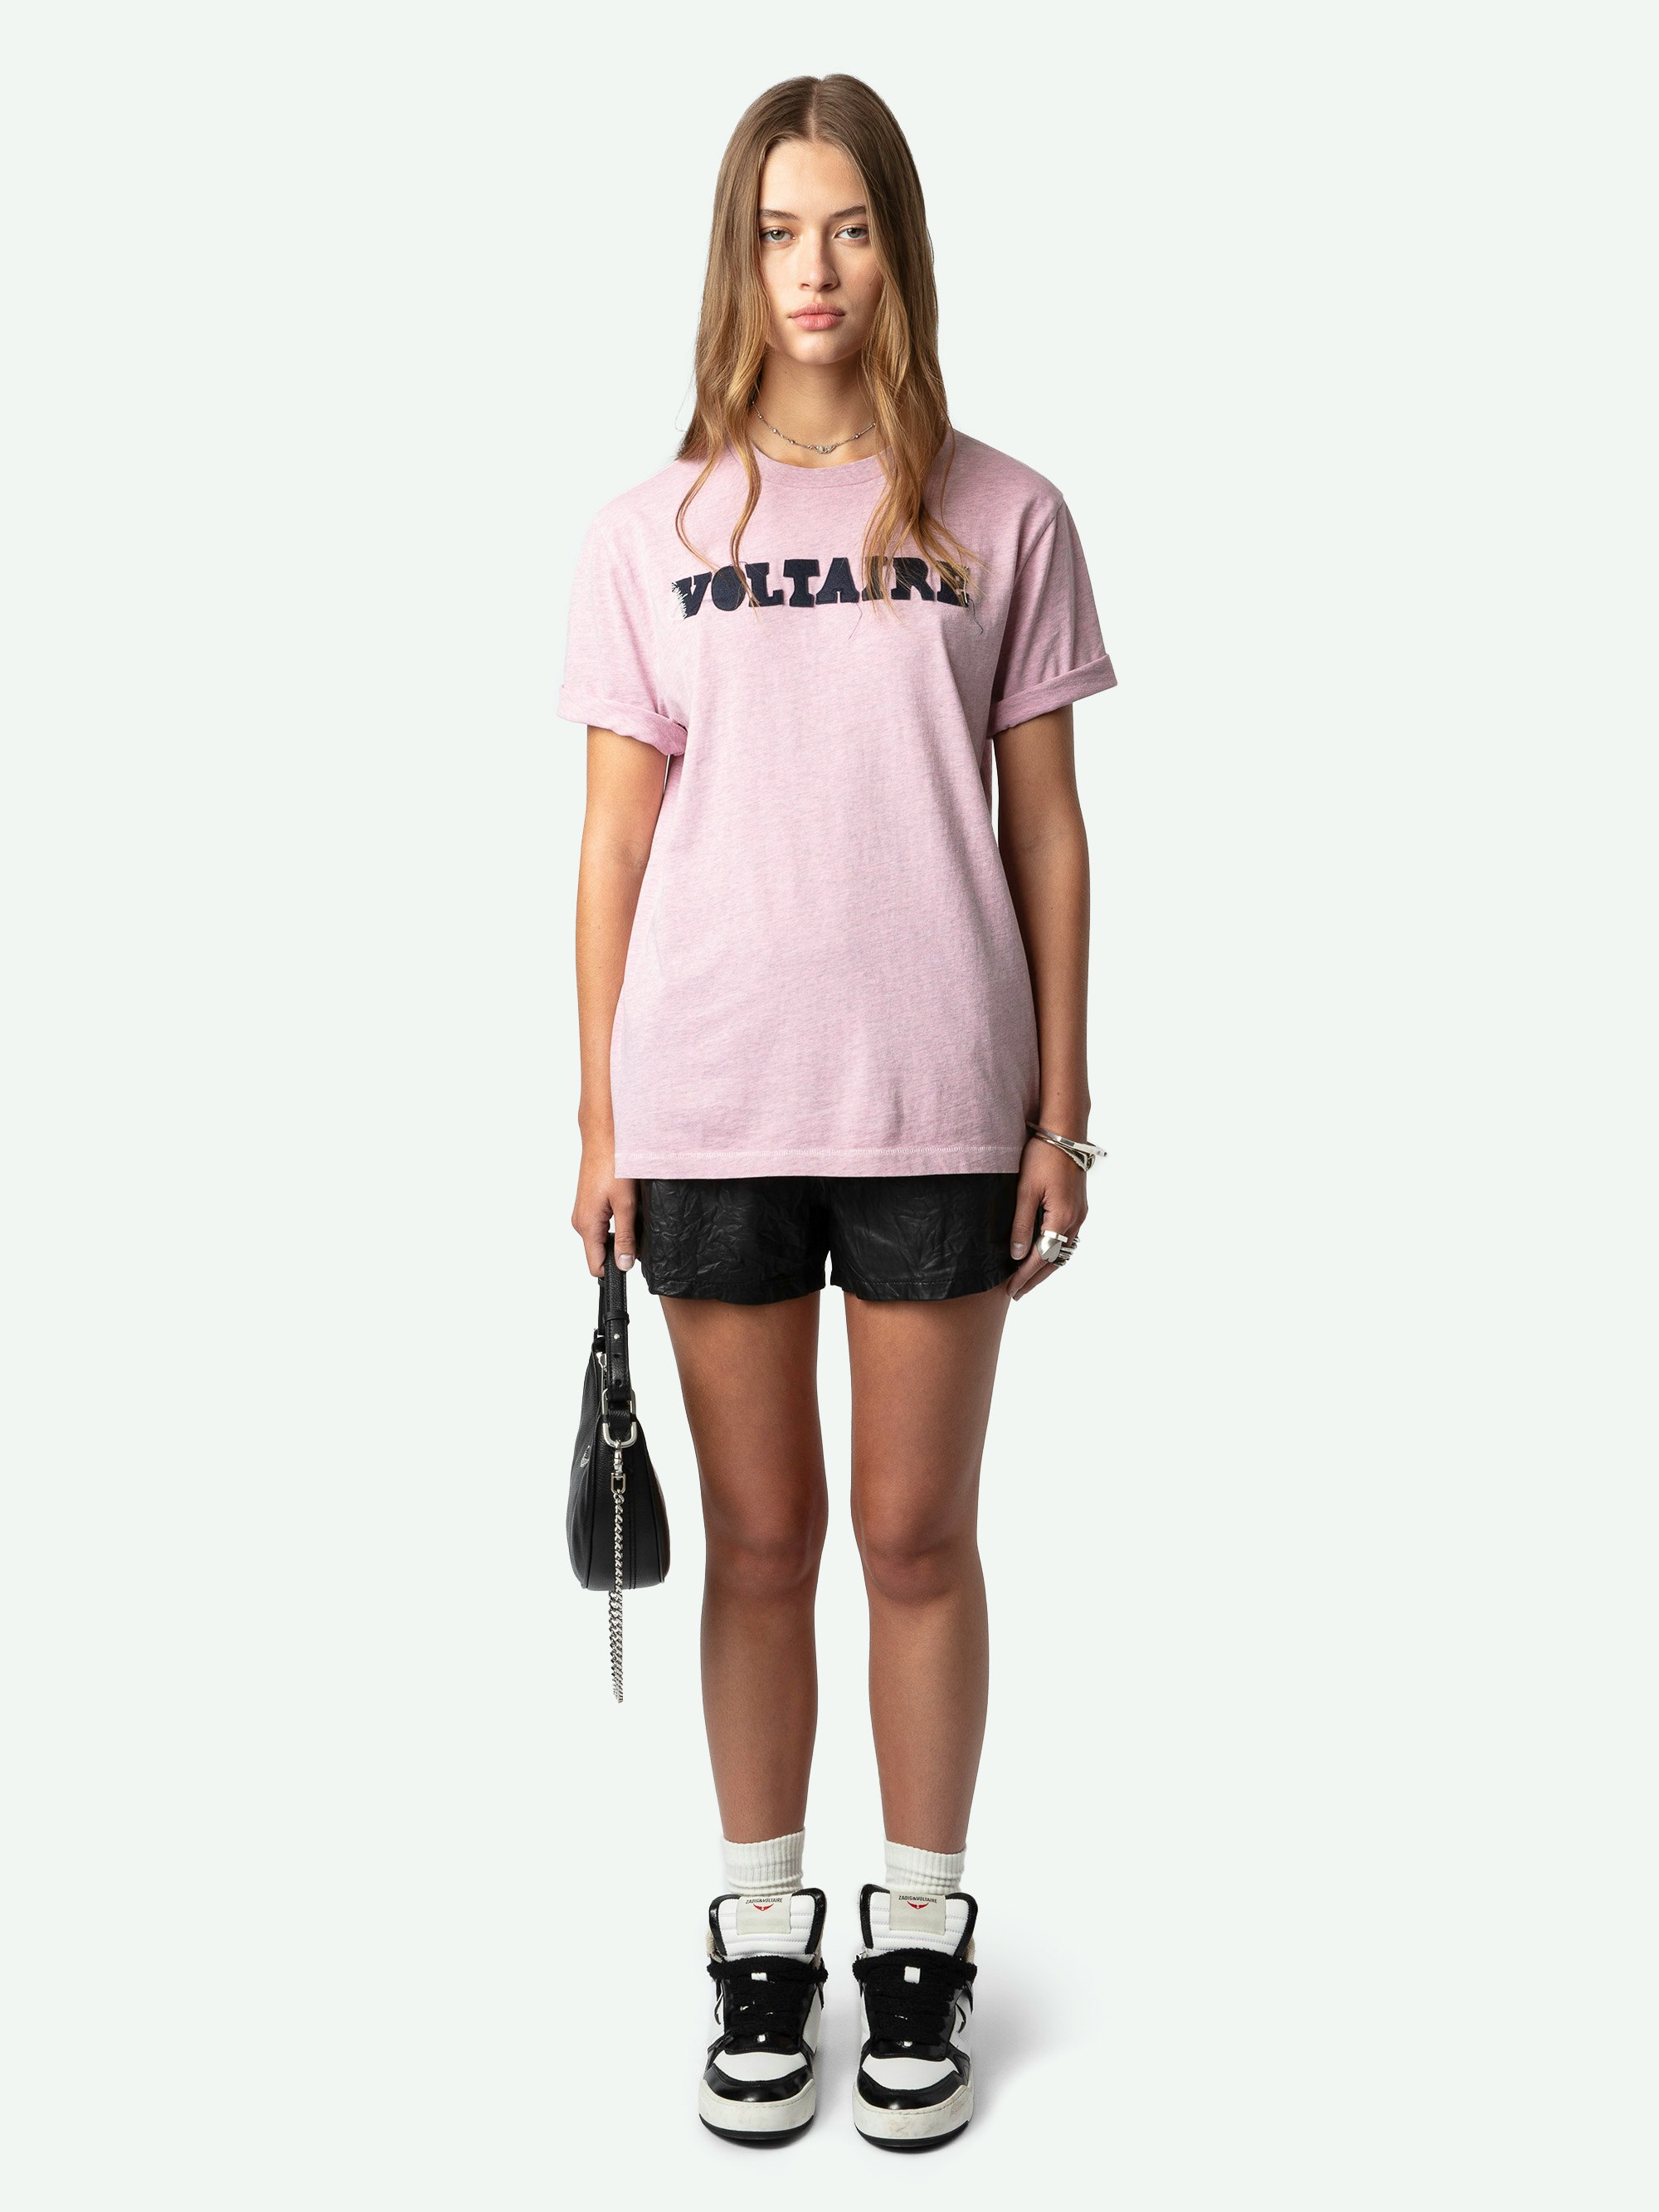 Edwin Voltaire T-shirt - Short-sleeved pink organic cotton T-shirt with distressed "Voltaire" patch print on front.